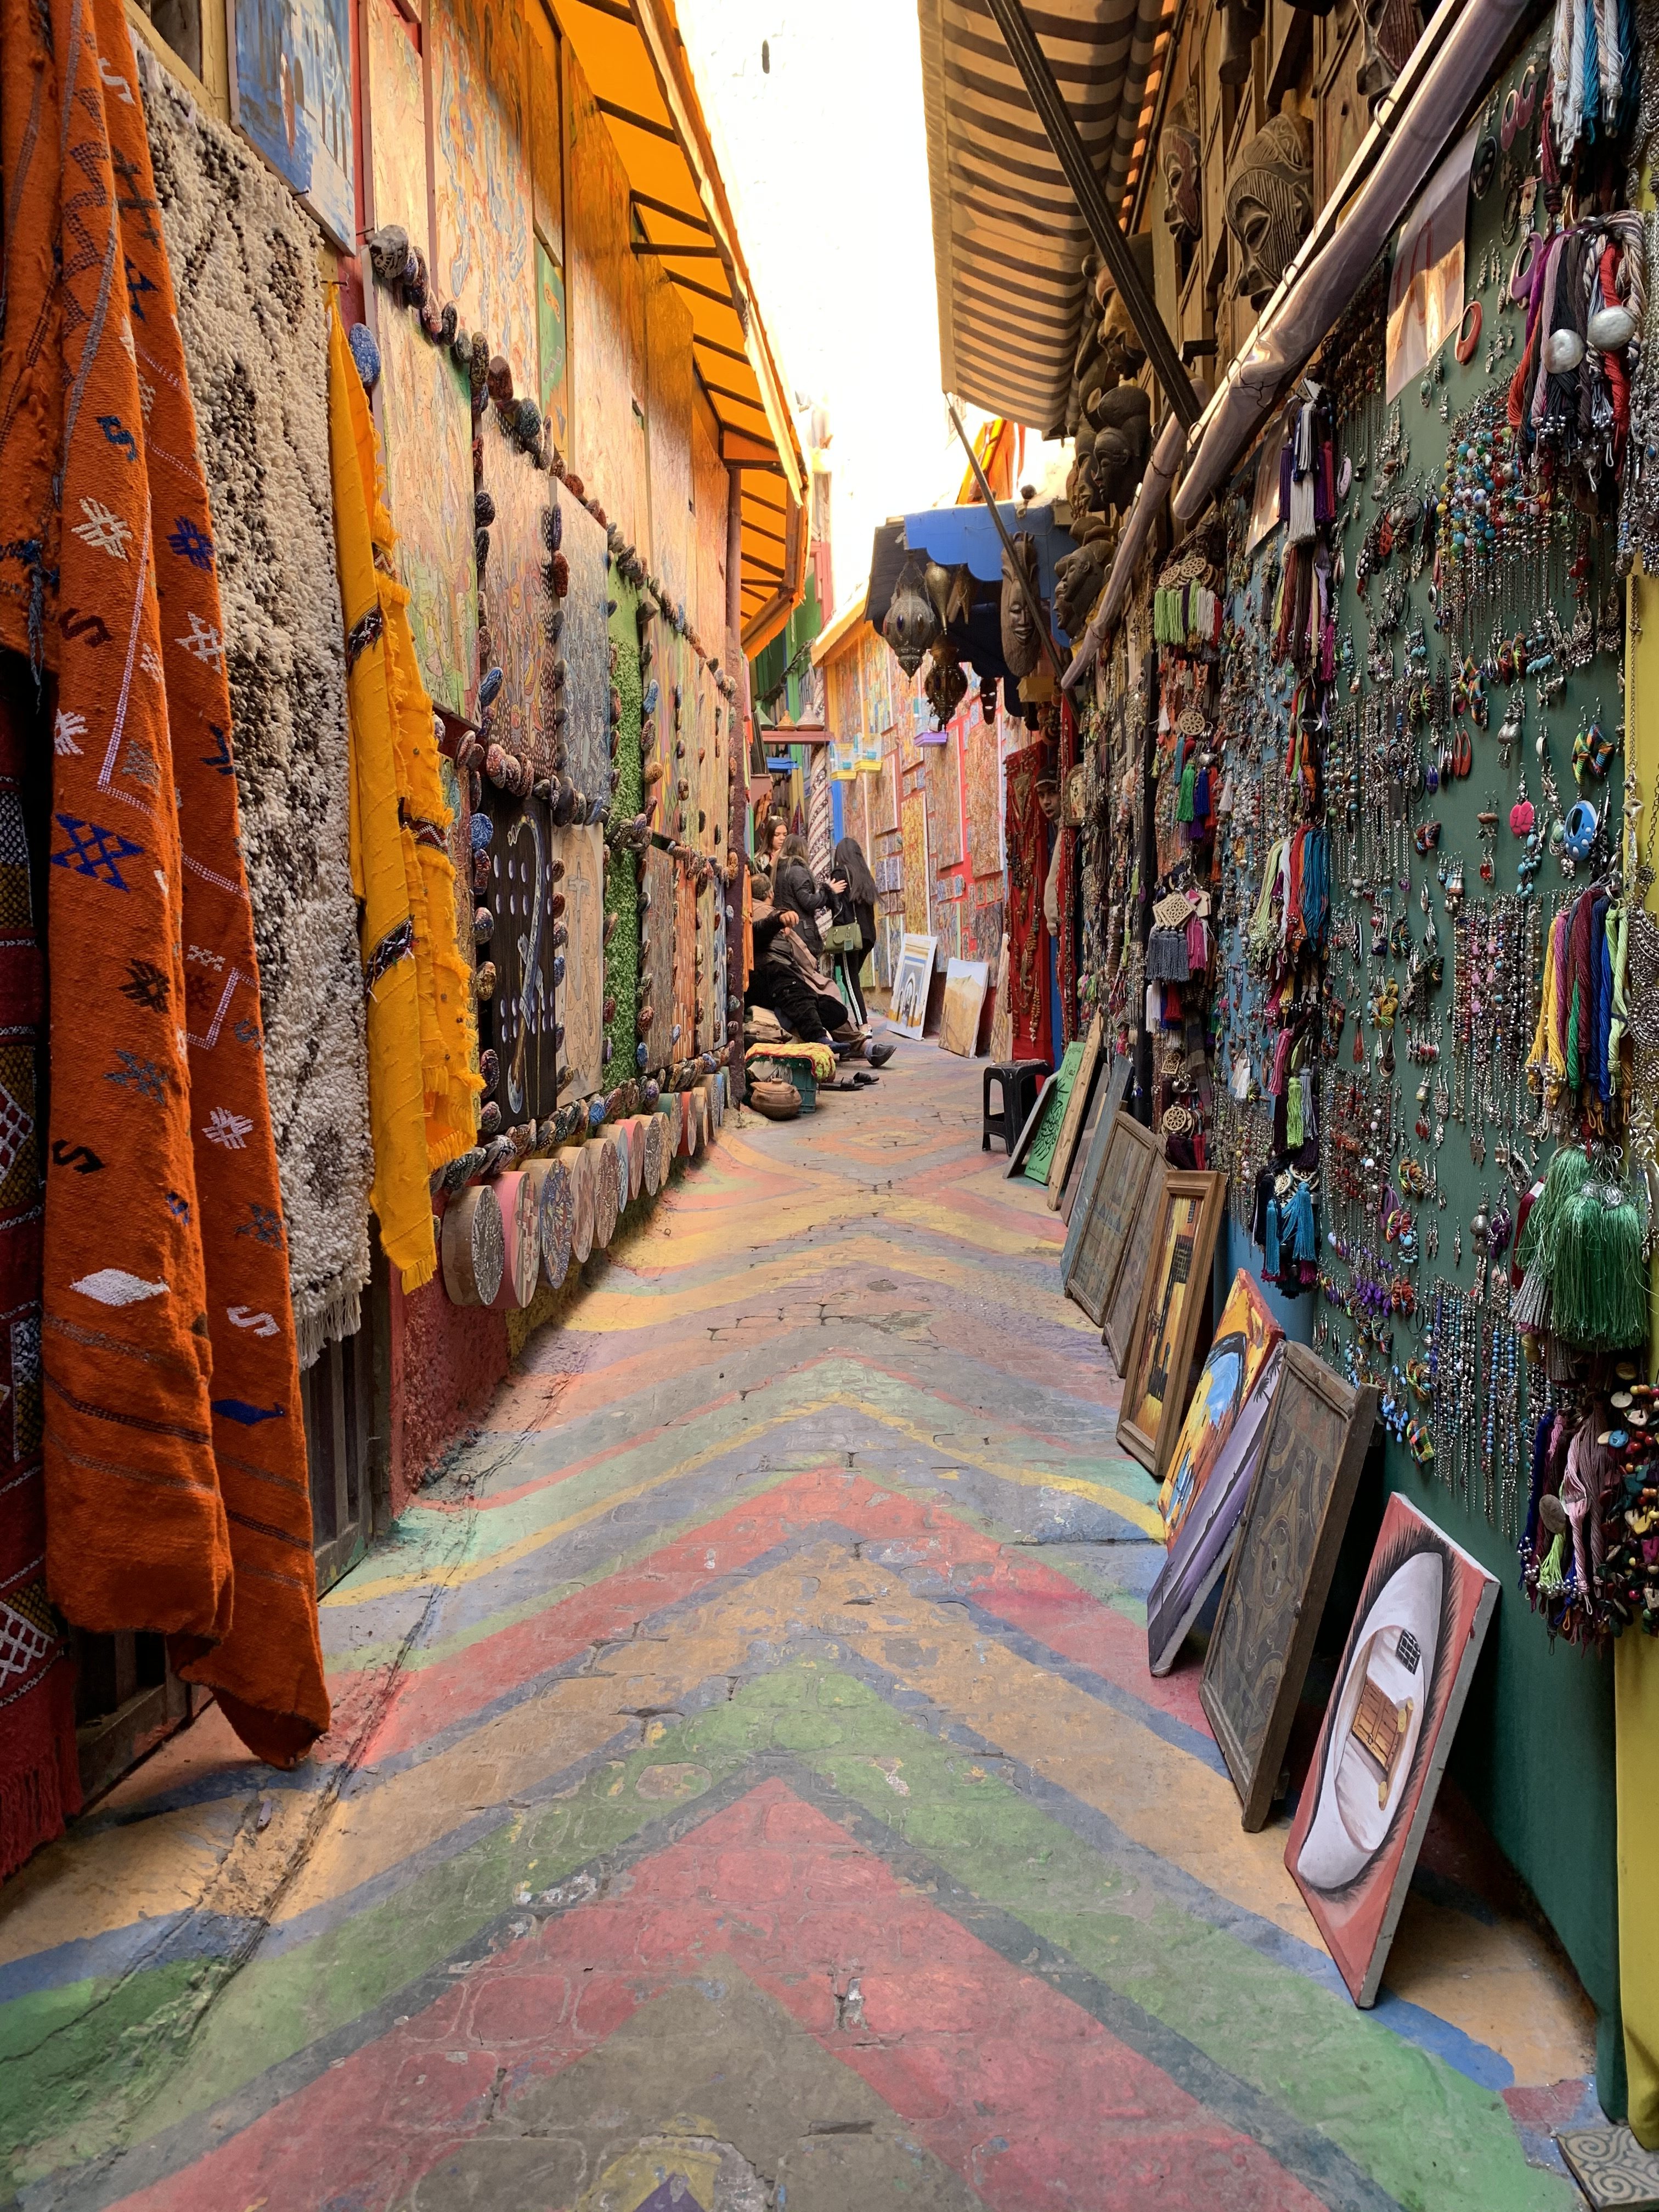 Rainbow street of art - paintings, rugs and many other types of artwork hanging on both sides of the street.